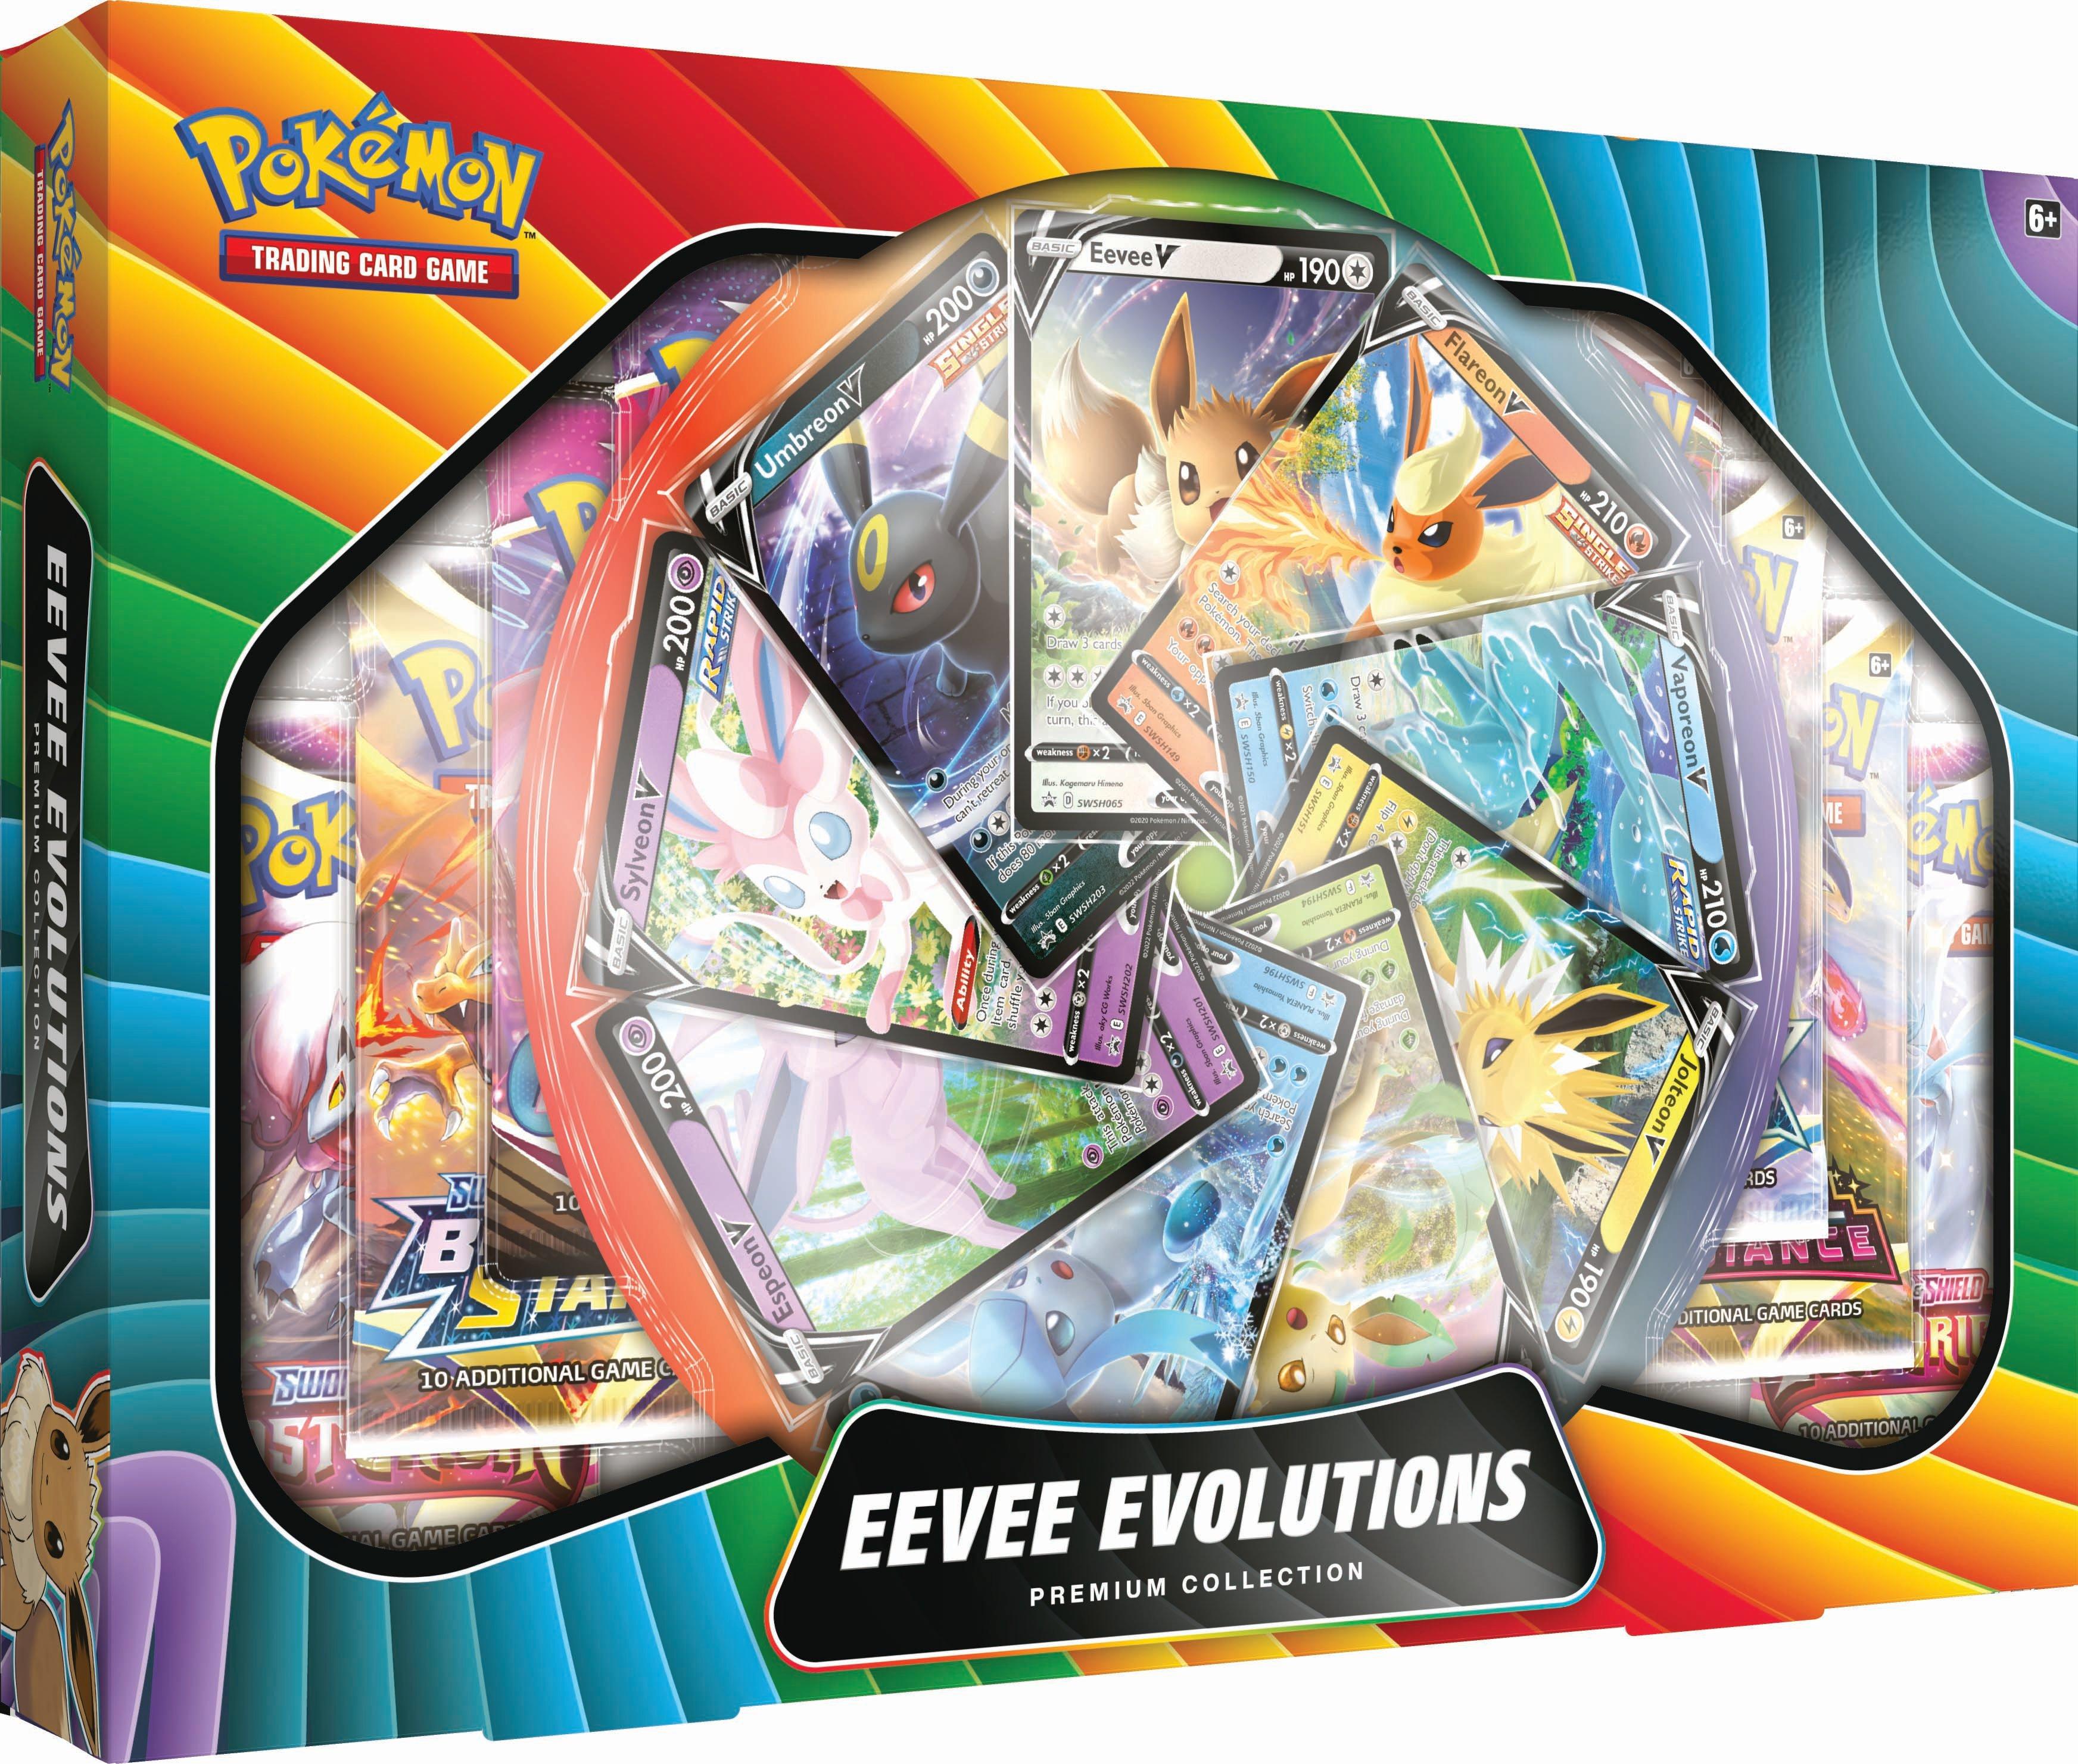 list item 11 of 14 Pokemon Trading Card Game: Eevee V Premium Collection